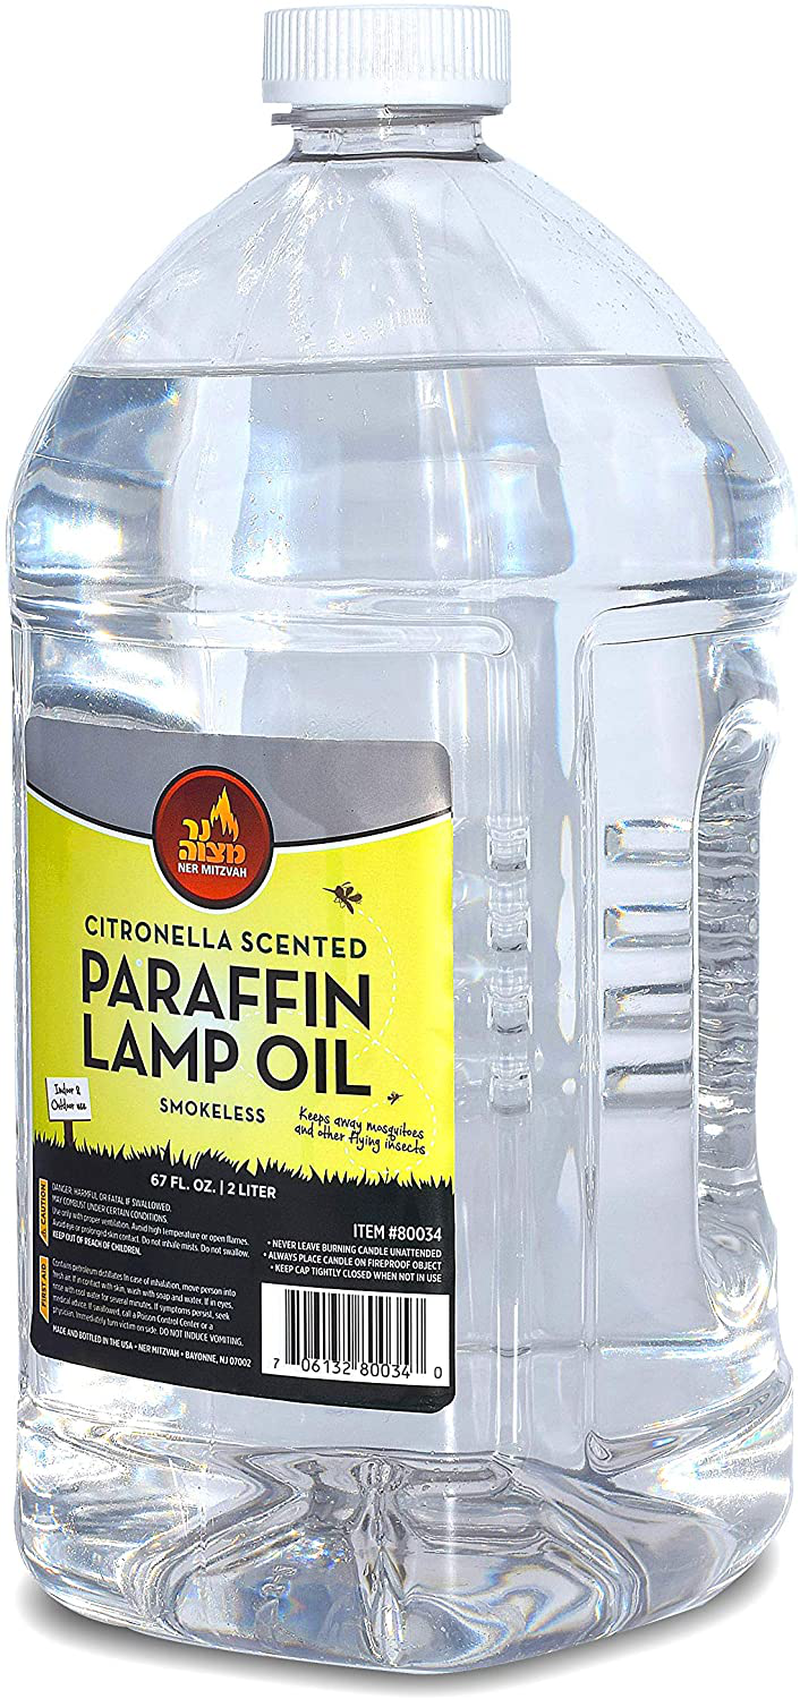 Citronella Scented Lamp Oil, 2 Liter - Smokeless and Odorless Insect and Mosquito Repellent Paraffin Lamp Oil for Indoor and Outdoor Lanterns, Torches, Oil Candle - by Ner Mitzvah Home & Garden > Lighting Accessories > Oil Lamp Fuel Ner Mitzvah 67 Ounces (2 Liters)  